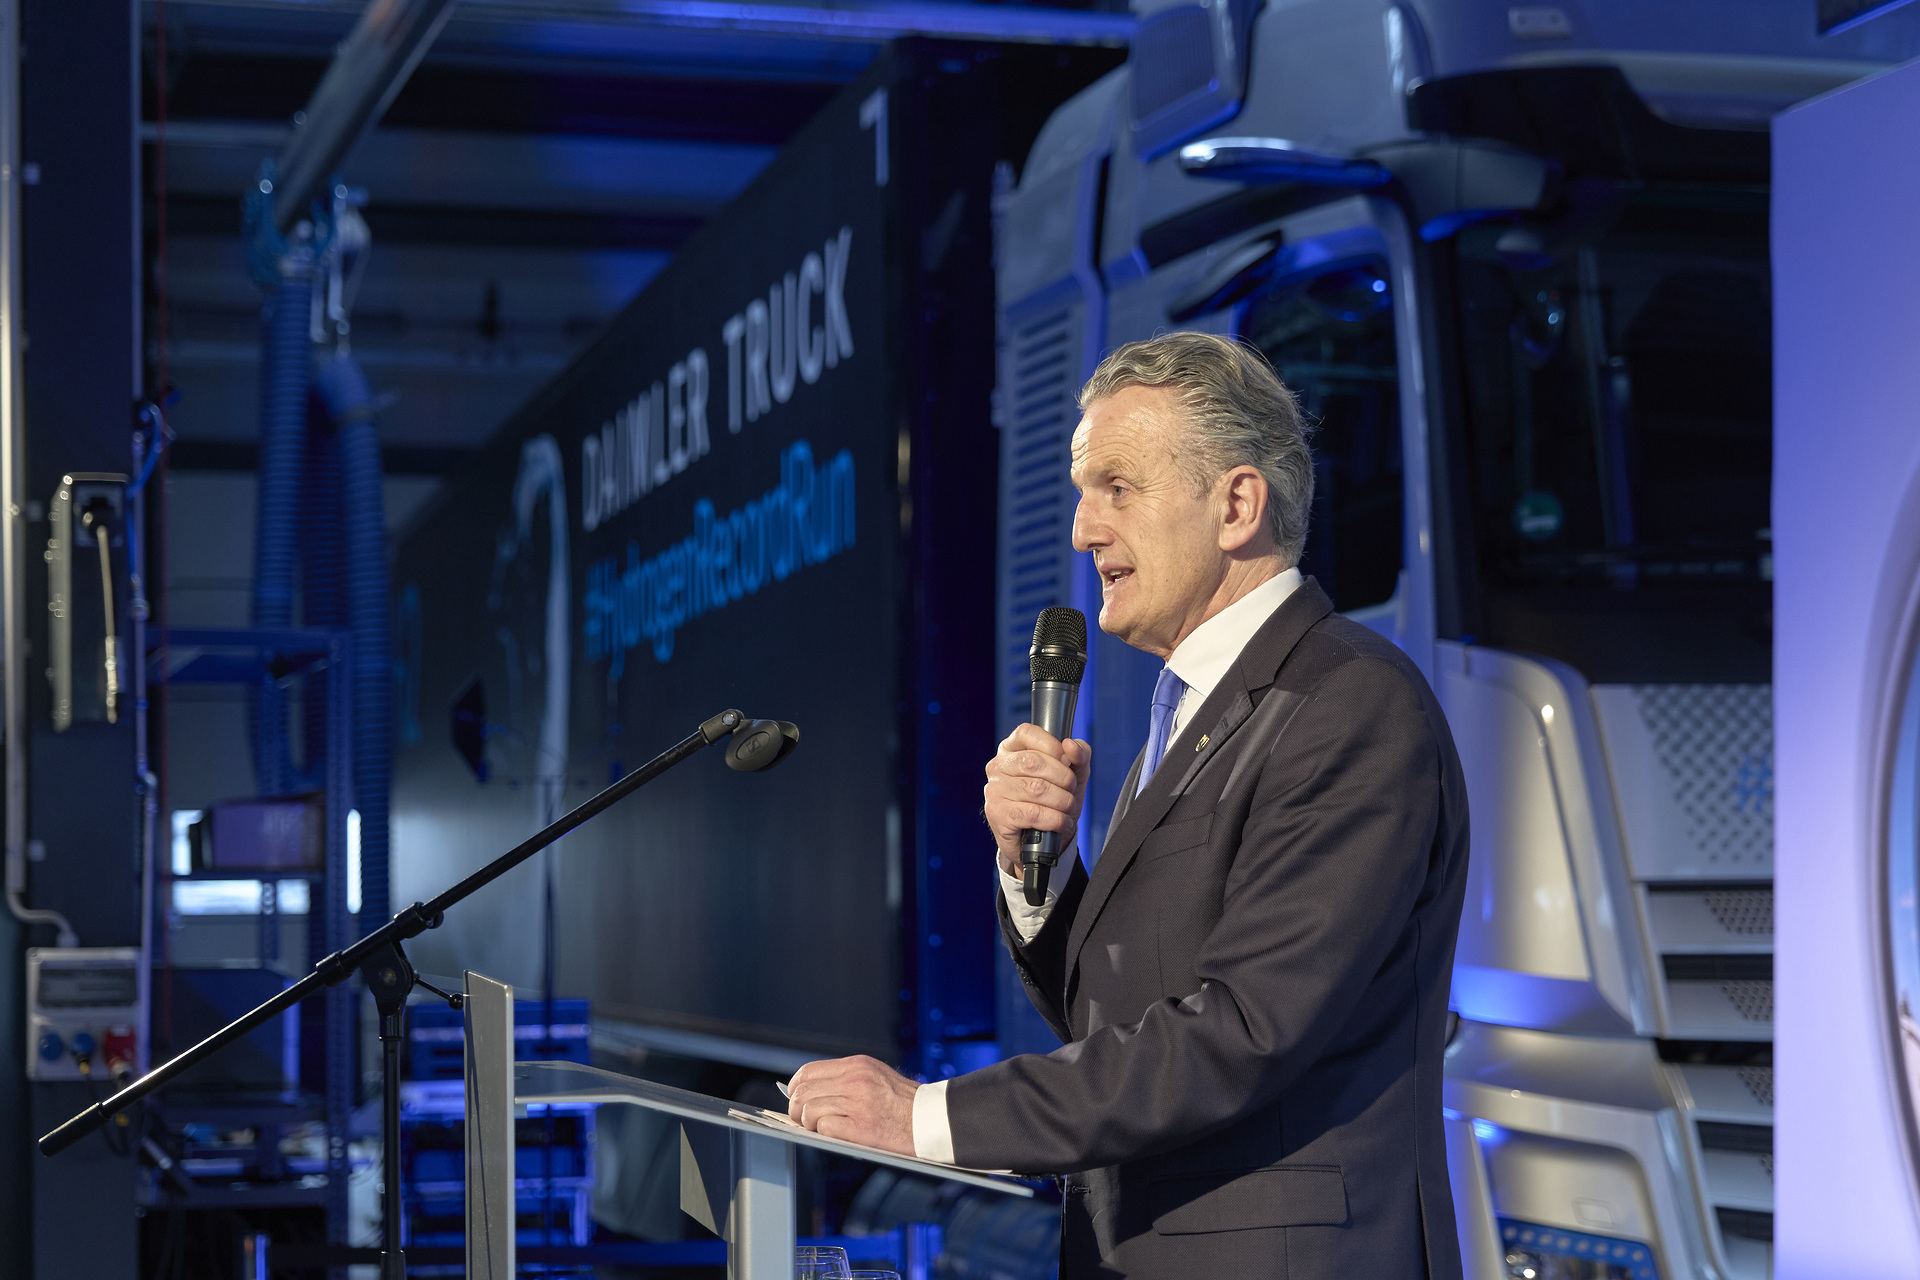 Daimler Truck opens new location for sales and servicing of trucks and buses in Stuttgart